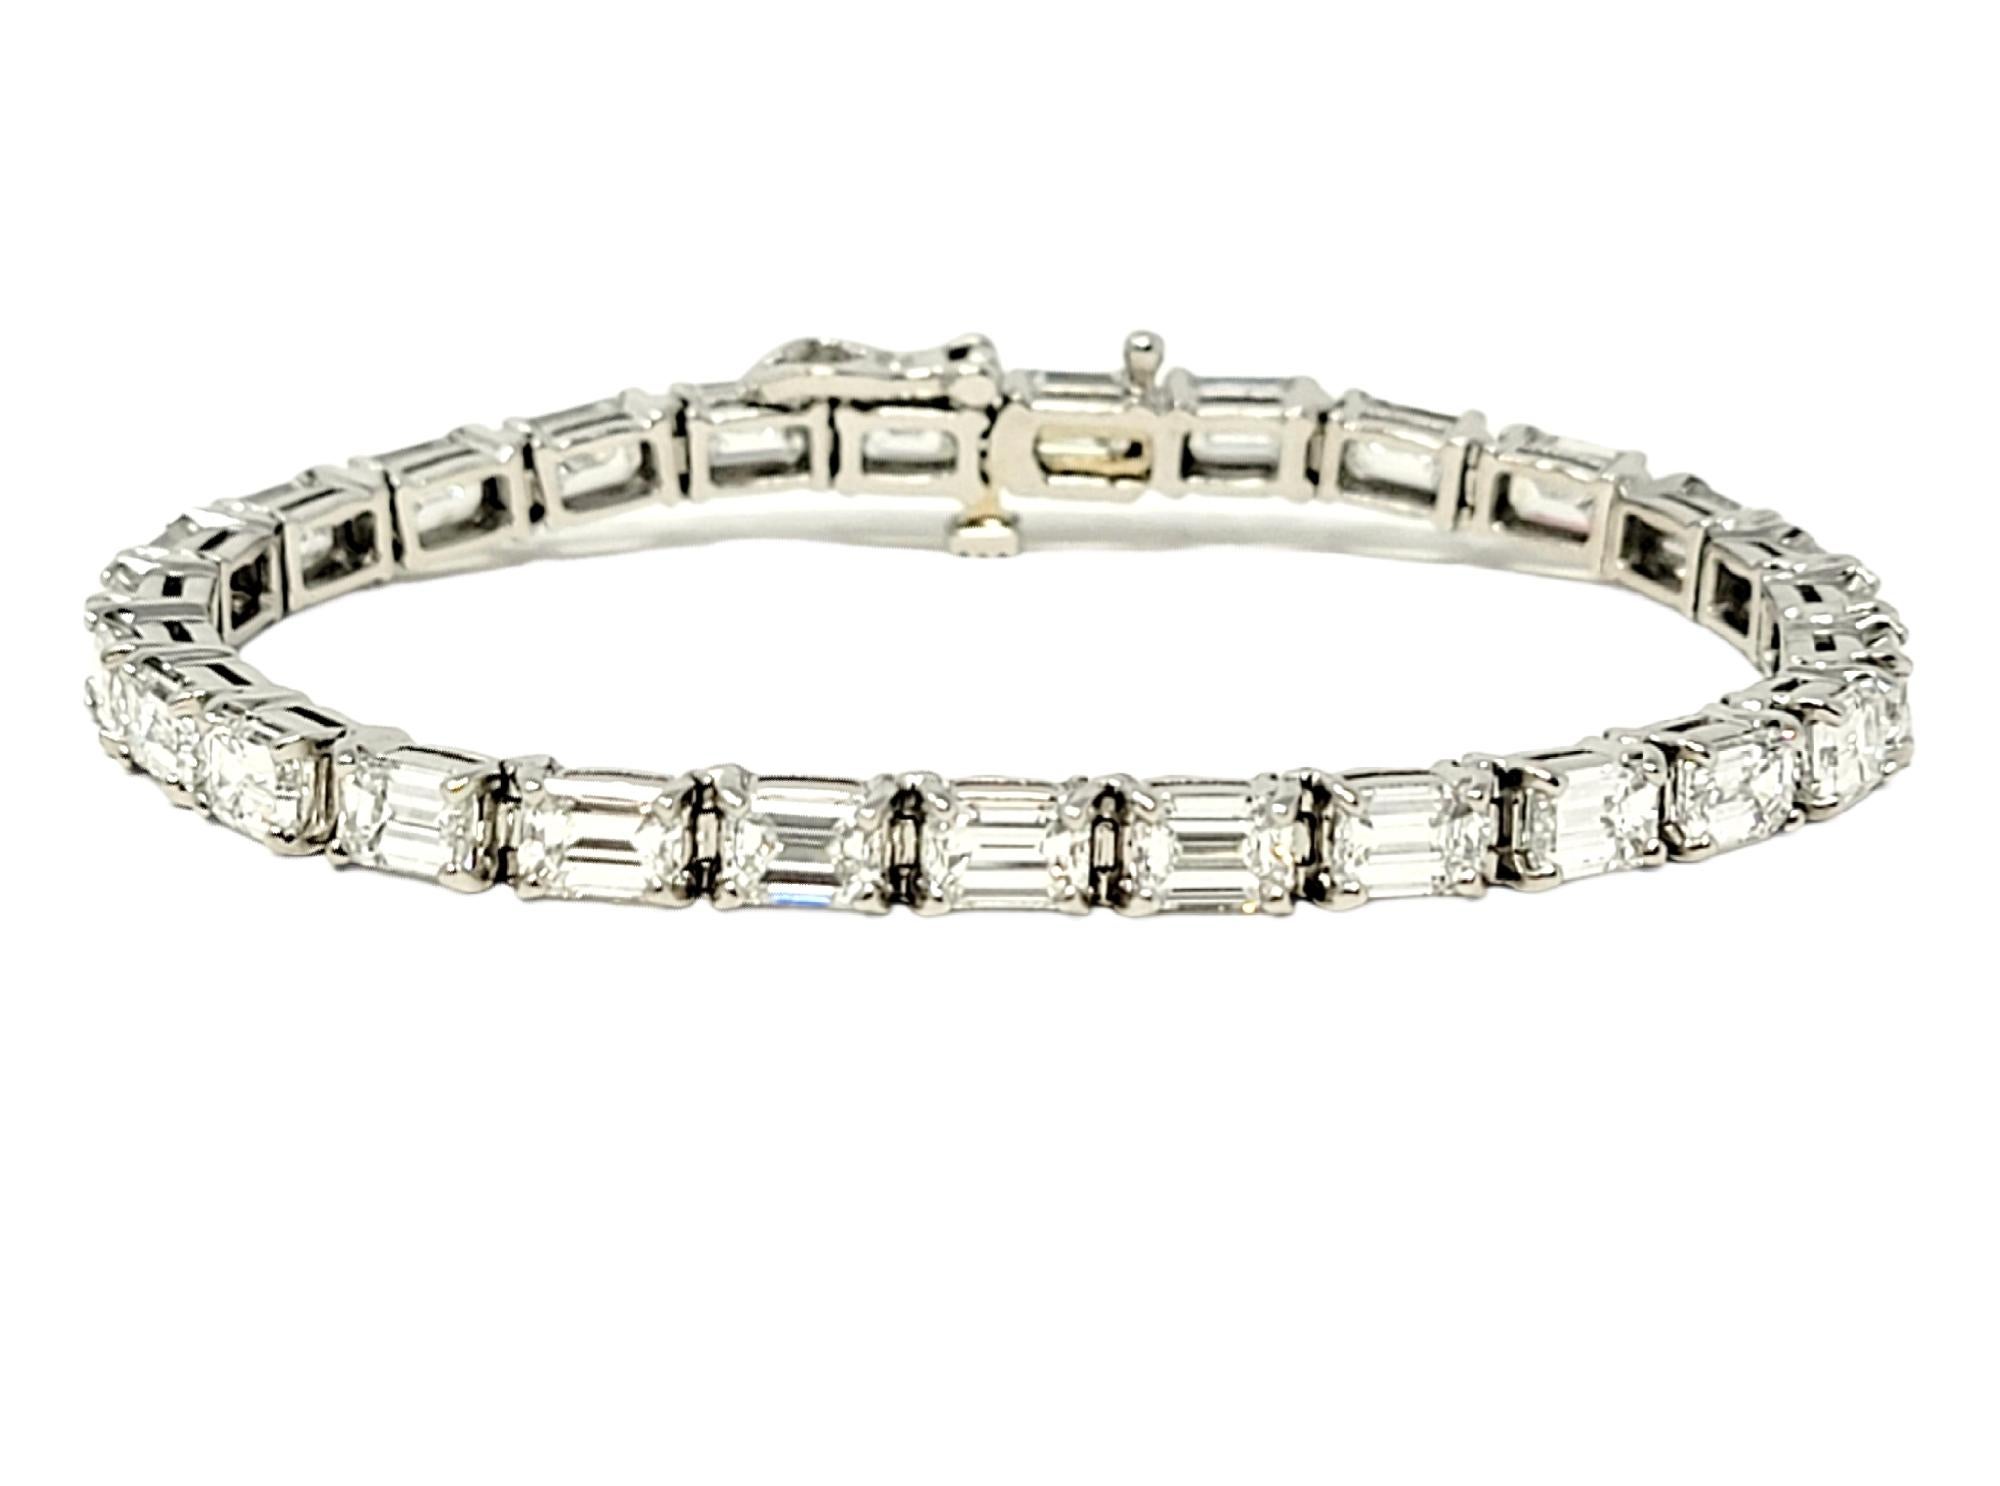 This is an absolutely exquisite diamond tennis bracelet that will stand the test of time. The luxurious platinum setting paired with the near flawless emerald cut diamonds makes this piece a true classic that will never go out of style. This